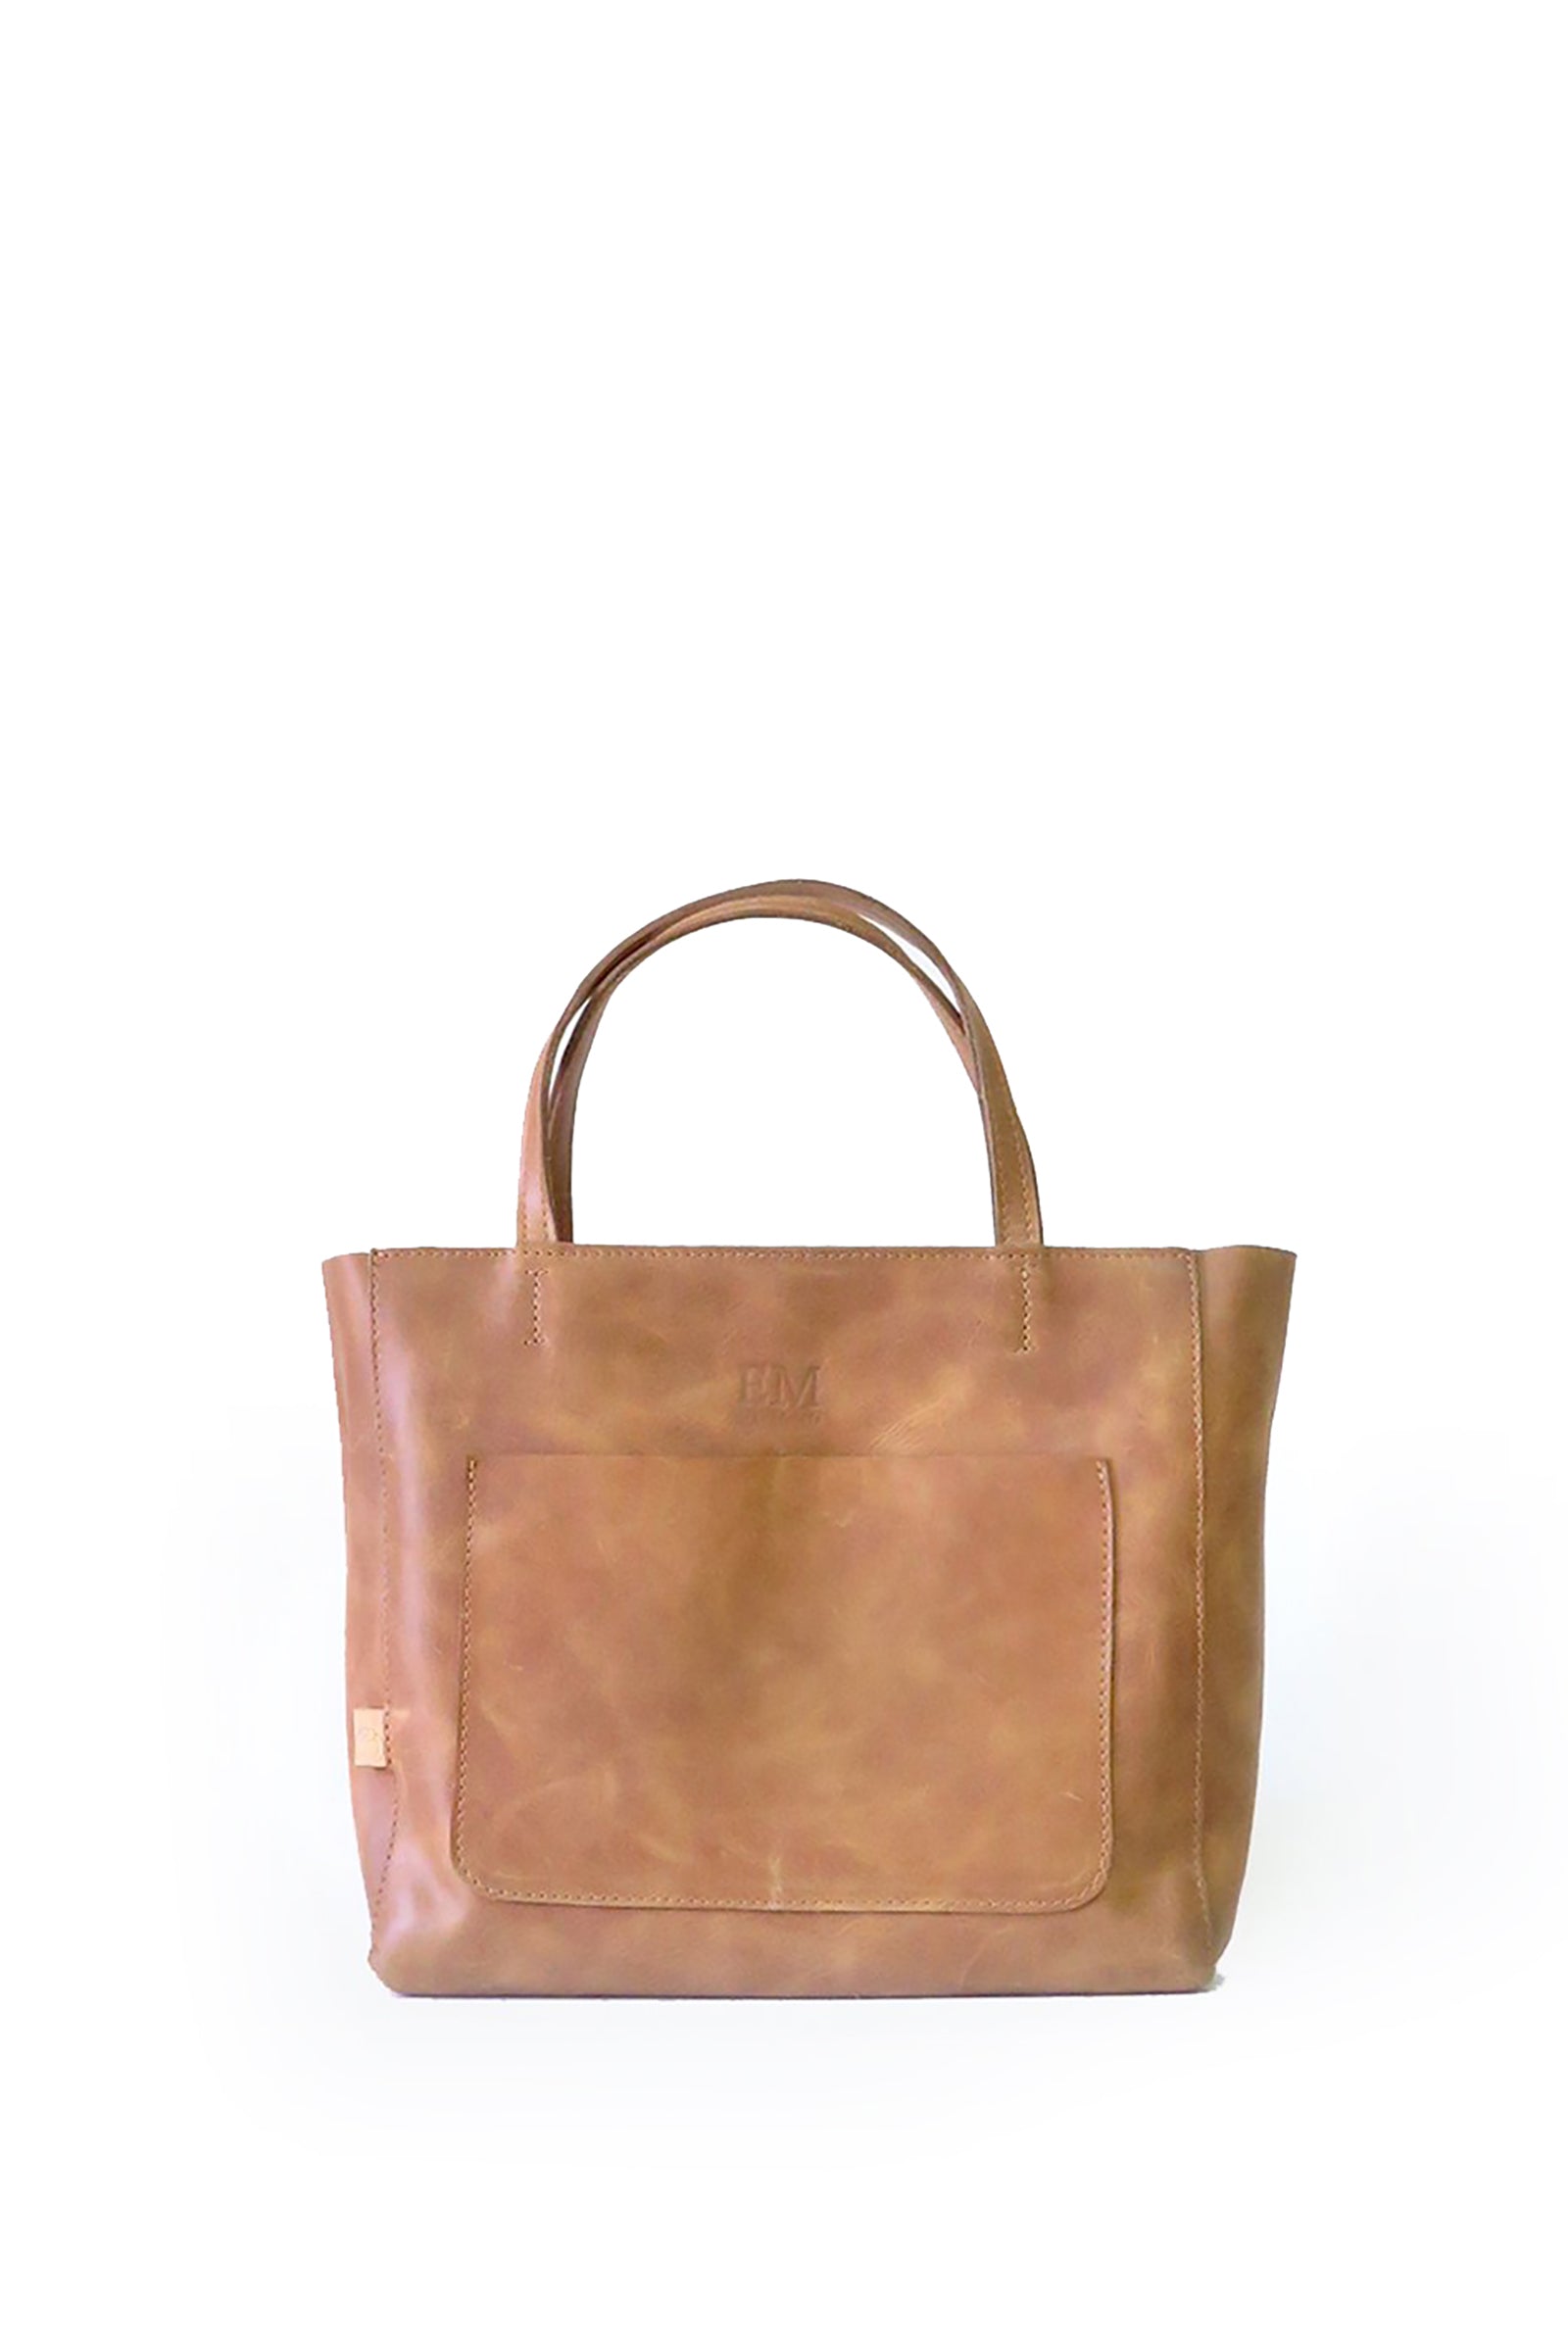 Tote N.14 Caramelo